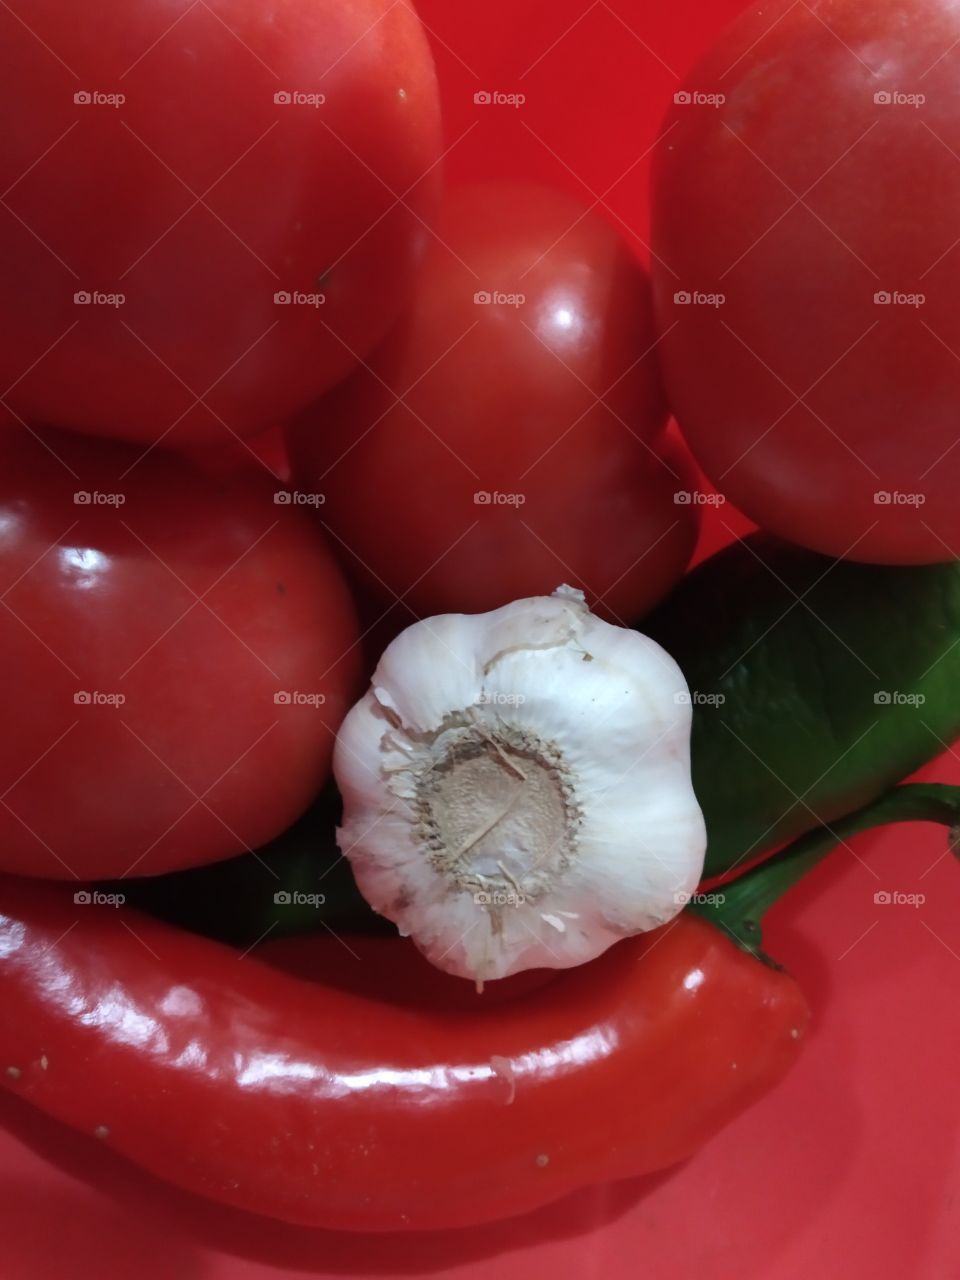 Garlic, Peppers and Tomato